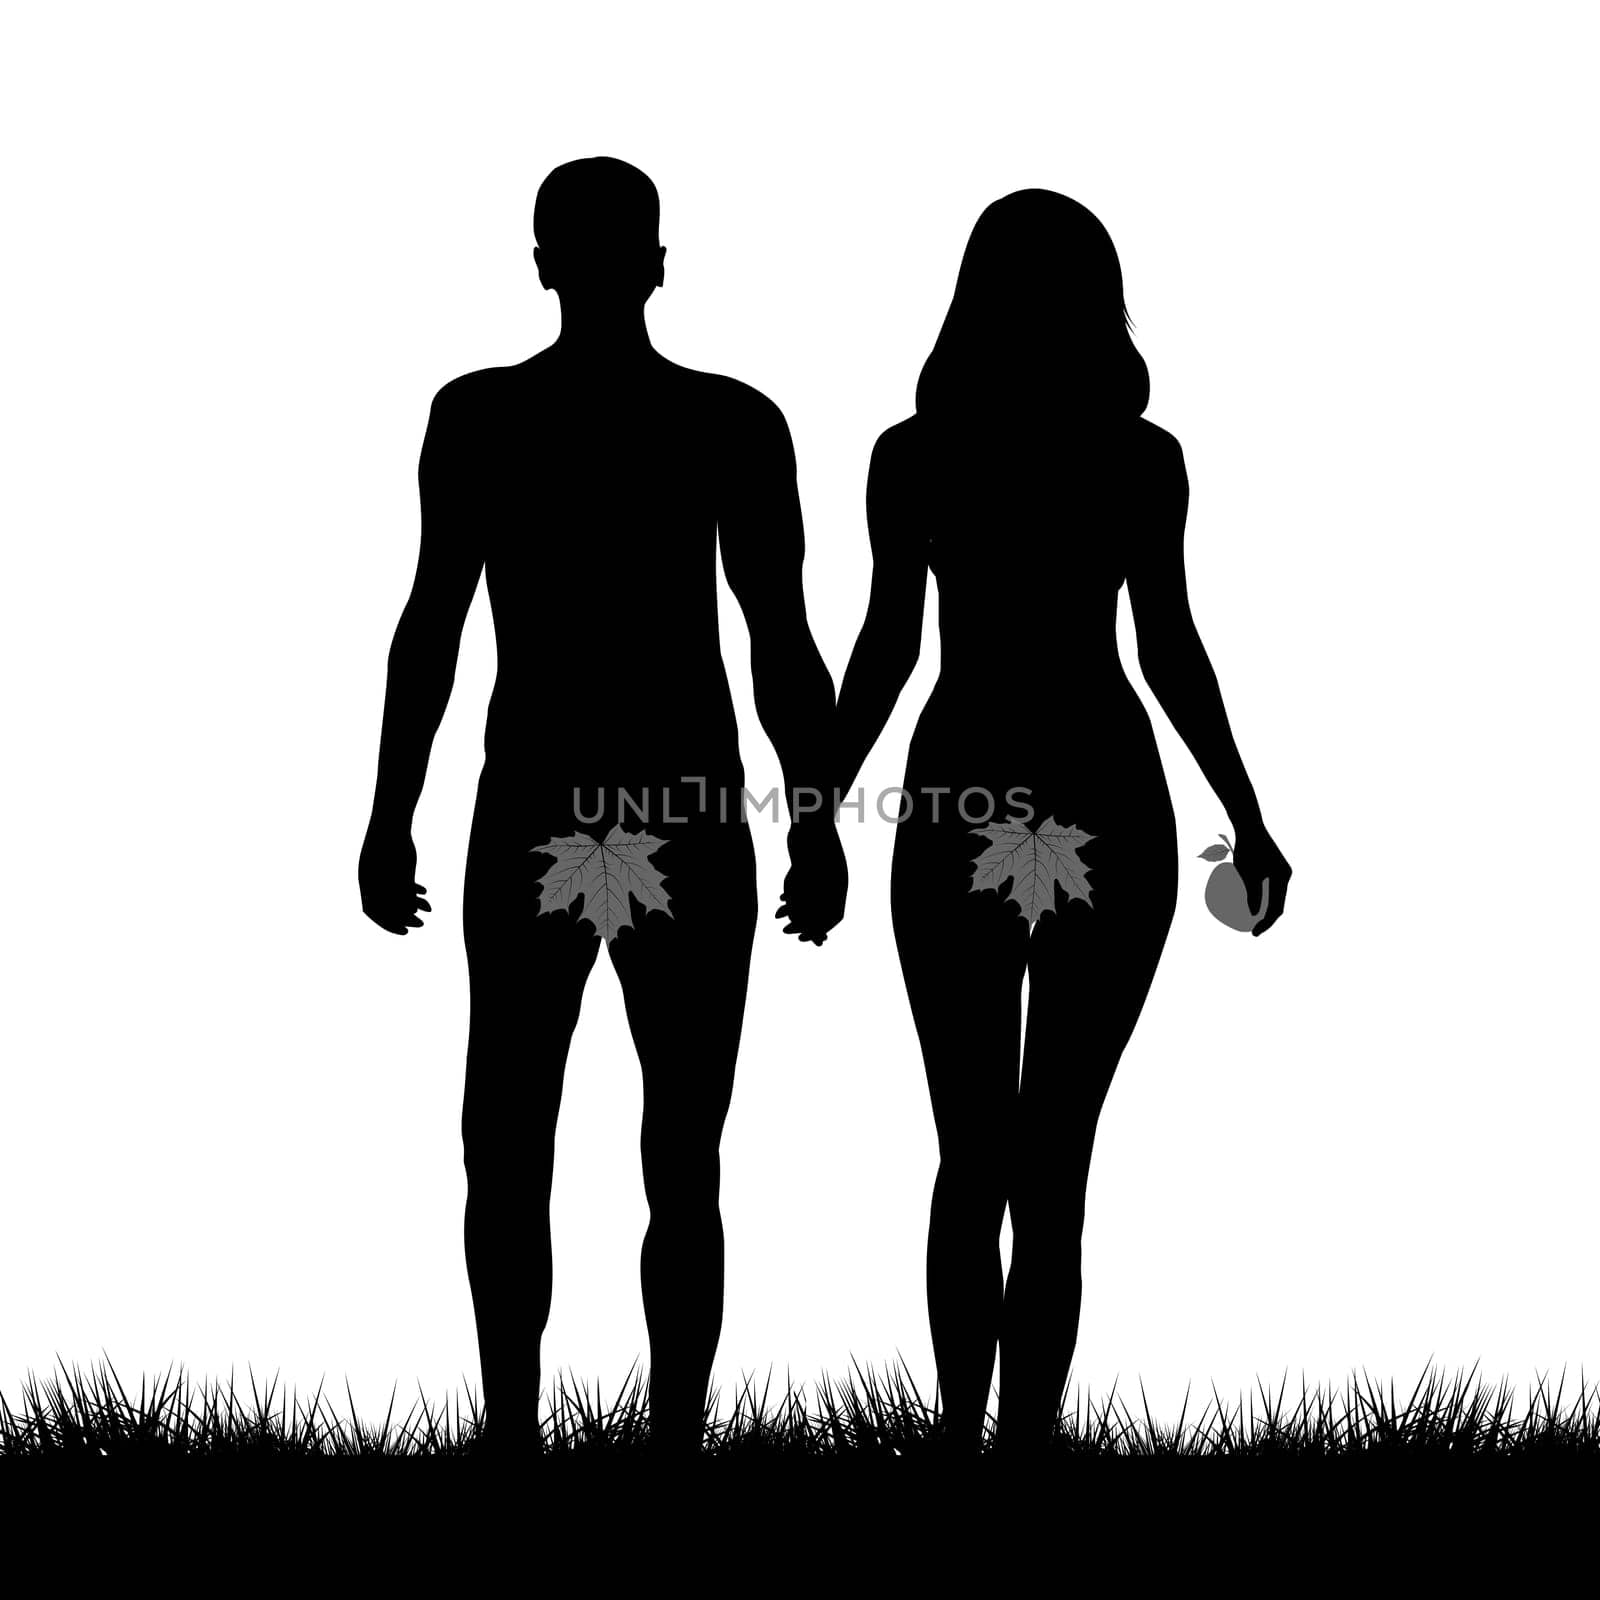 Adam and Eve silhouettes